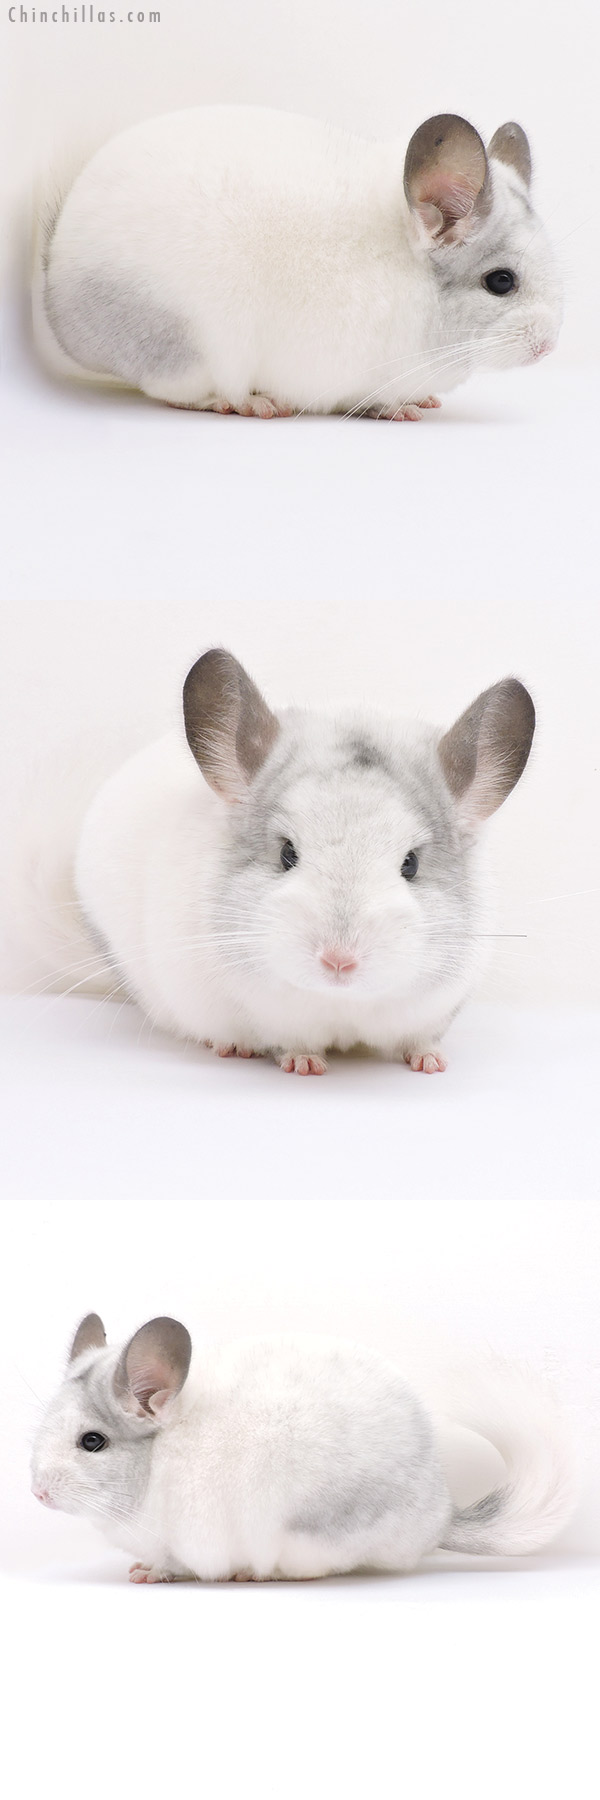 Chinchilla or related item offered for sale or export on Chinchillas.com - 16331 Top Show Quality White Mosaic Male Chinchilla